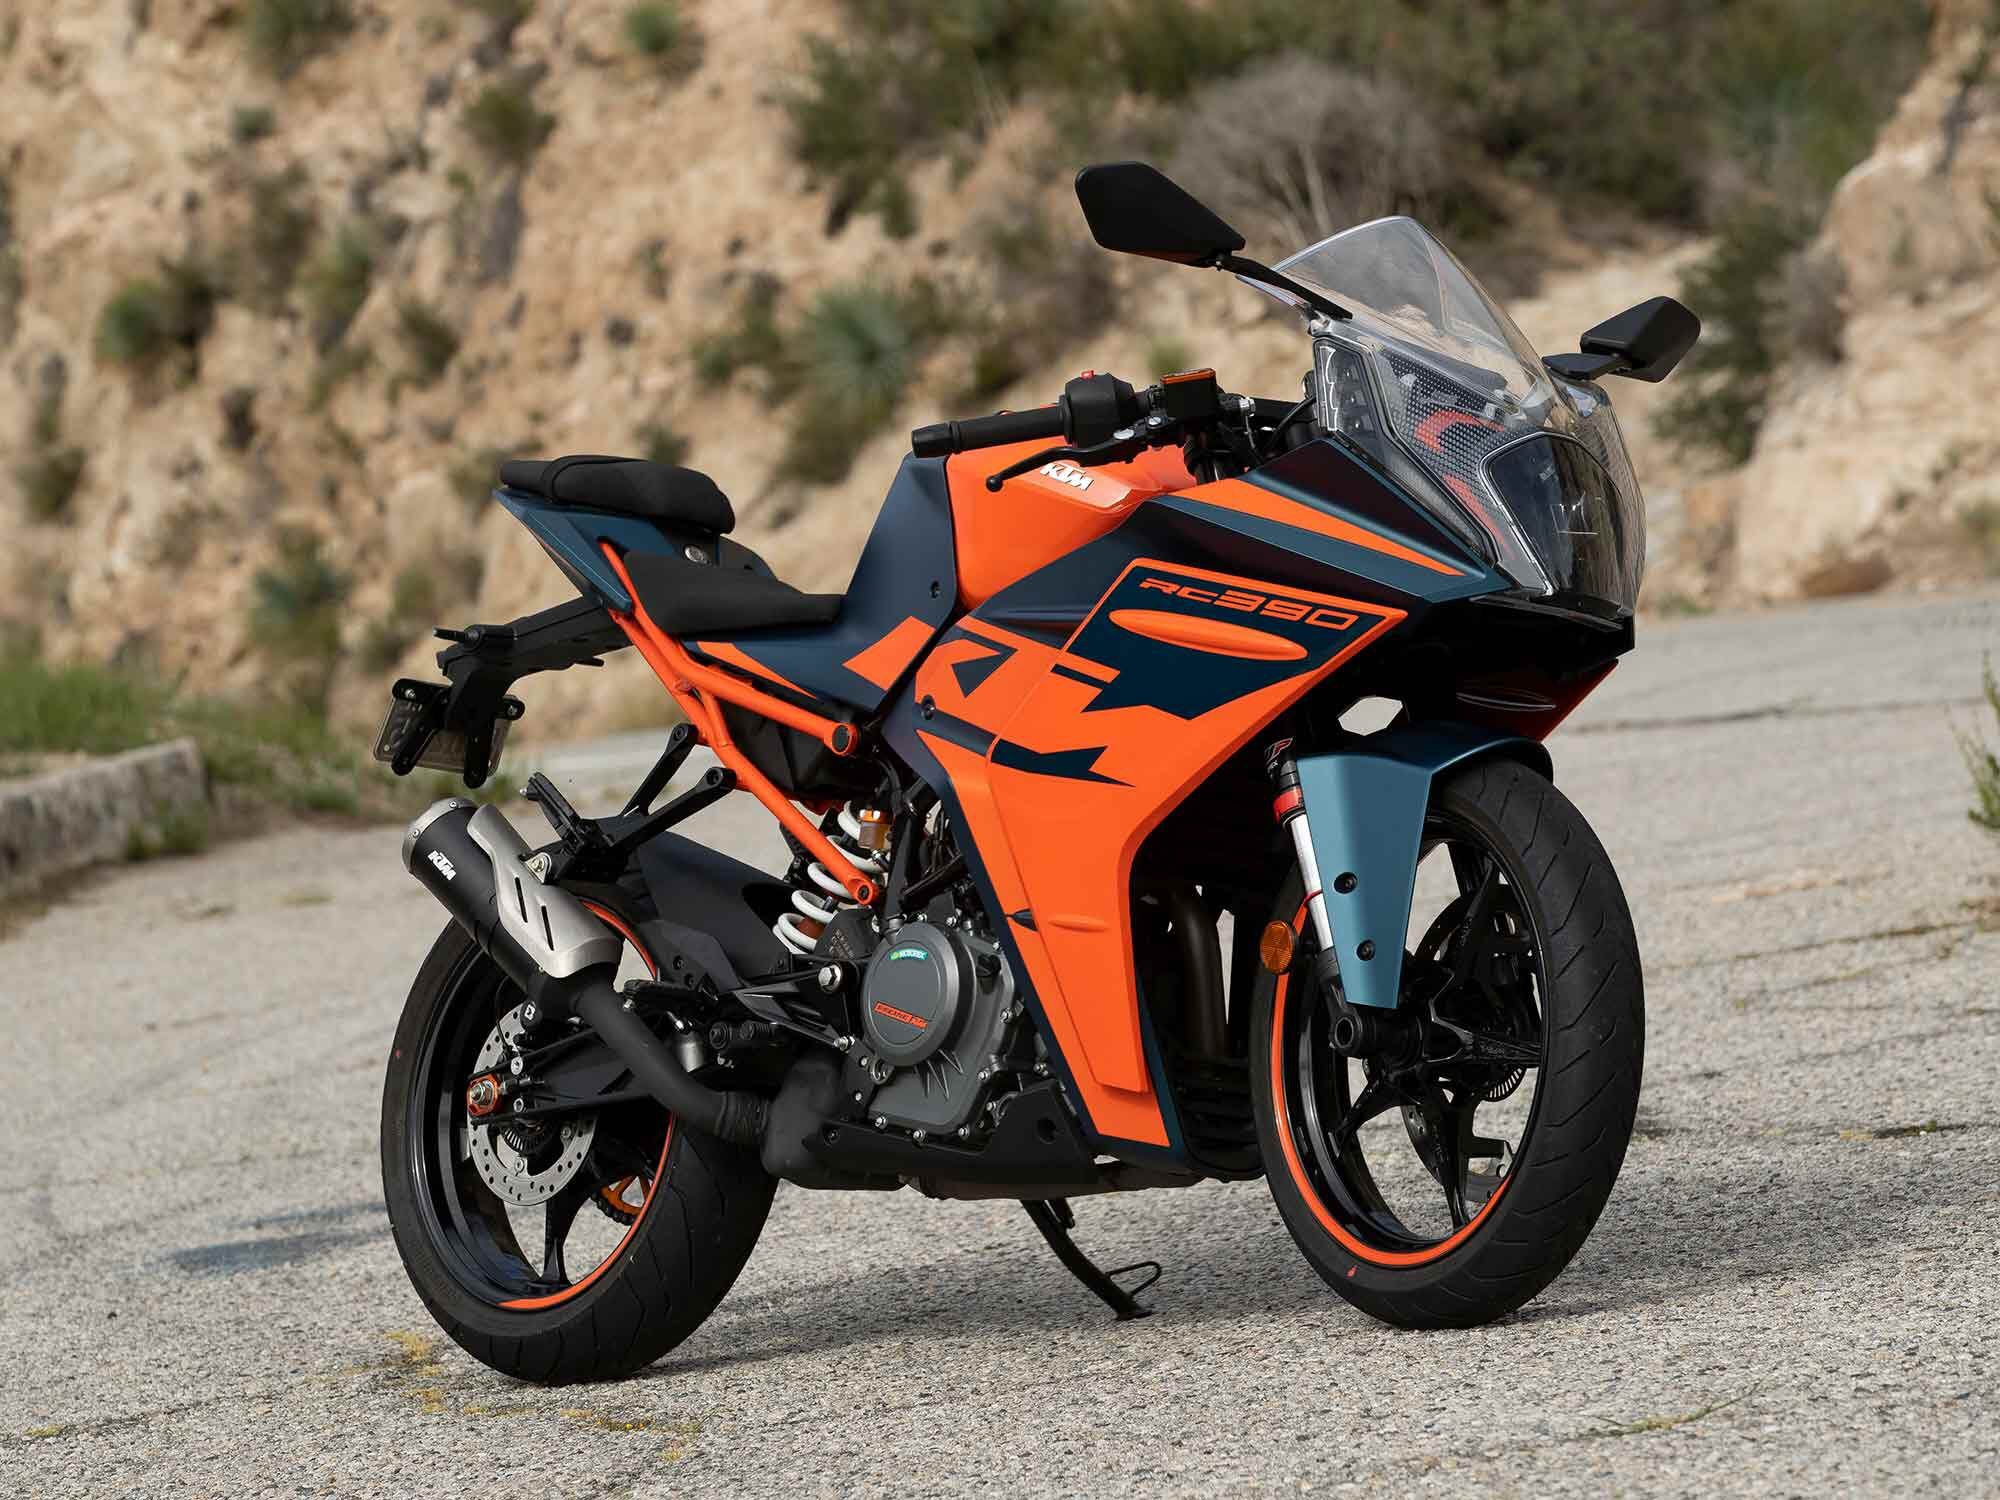 Beginner's racebike or fuel-sipping commuter? The KTM RC 390 can be both.